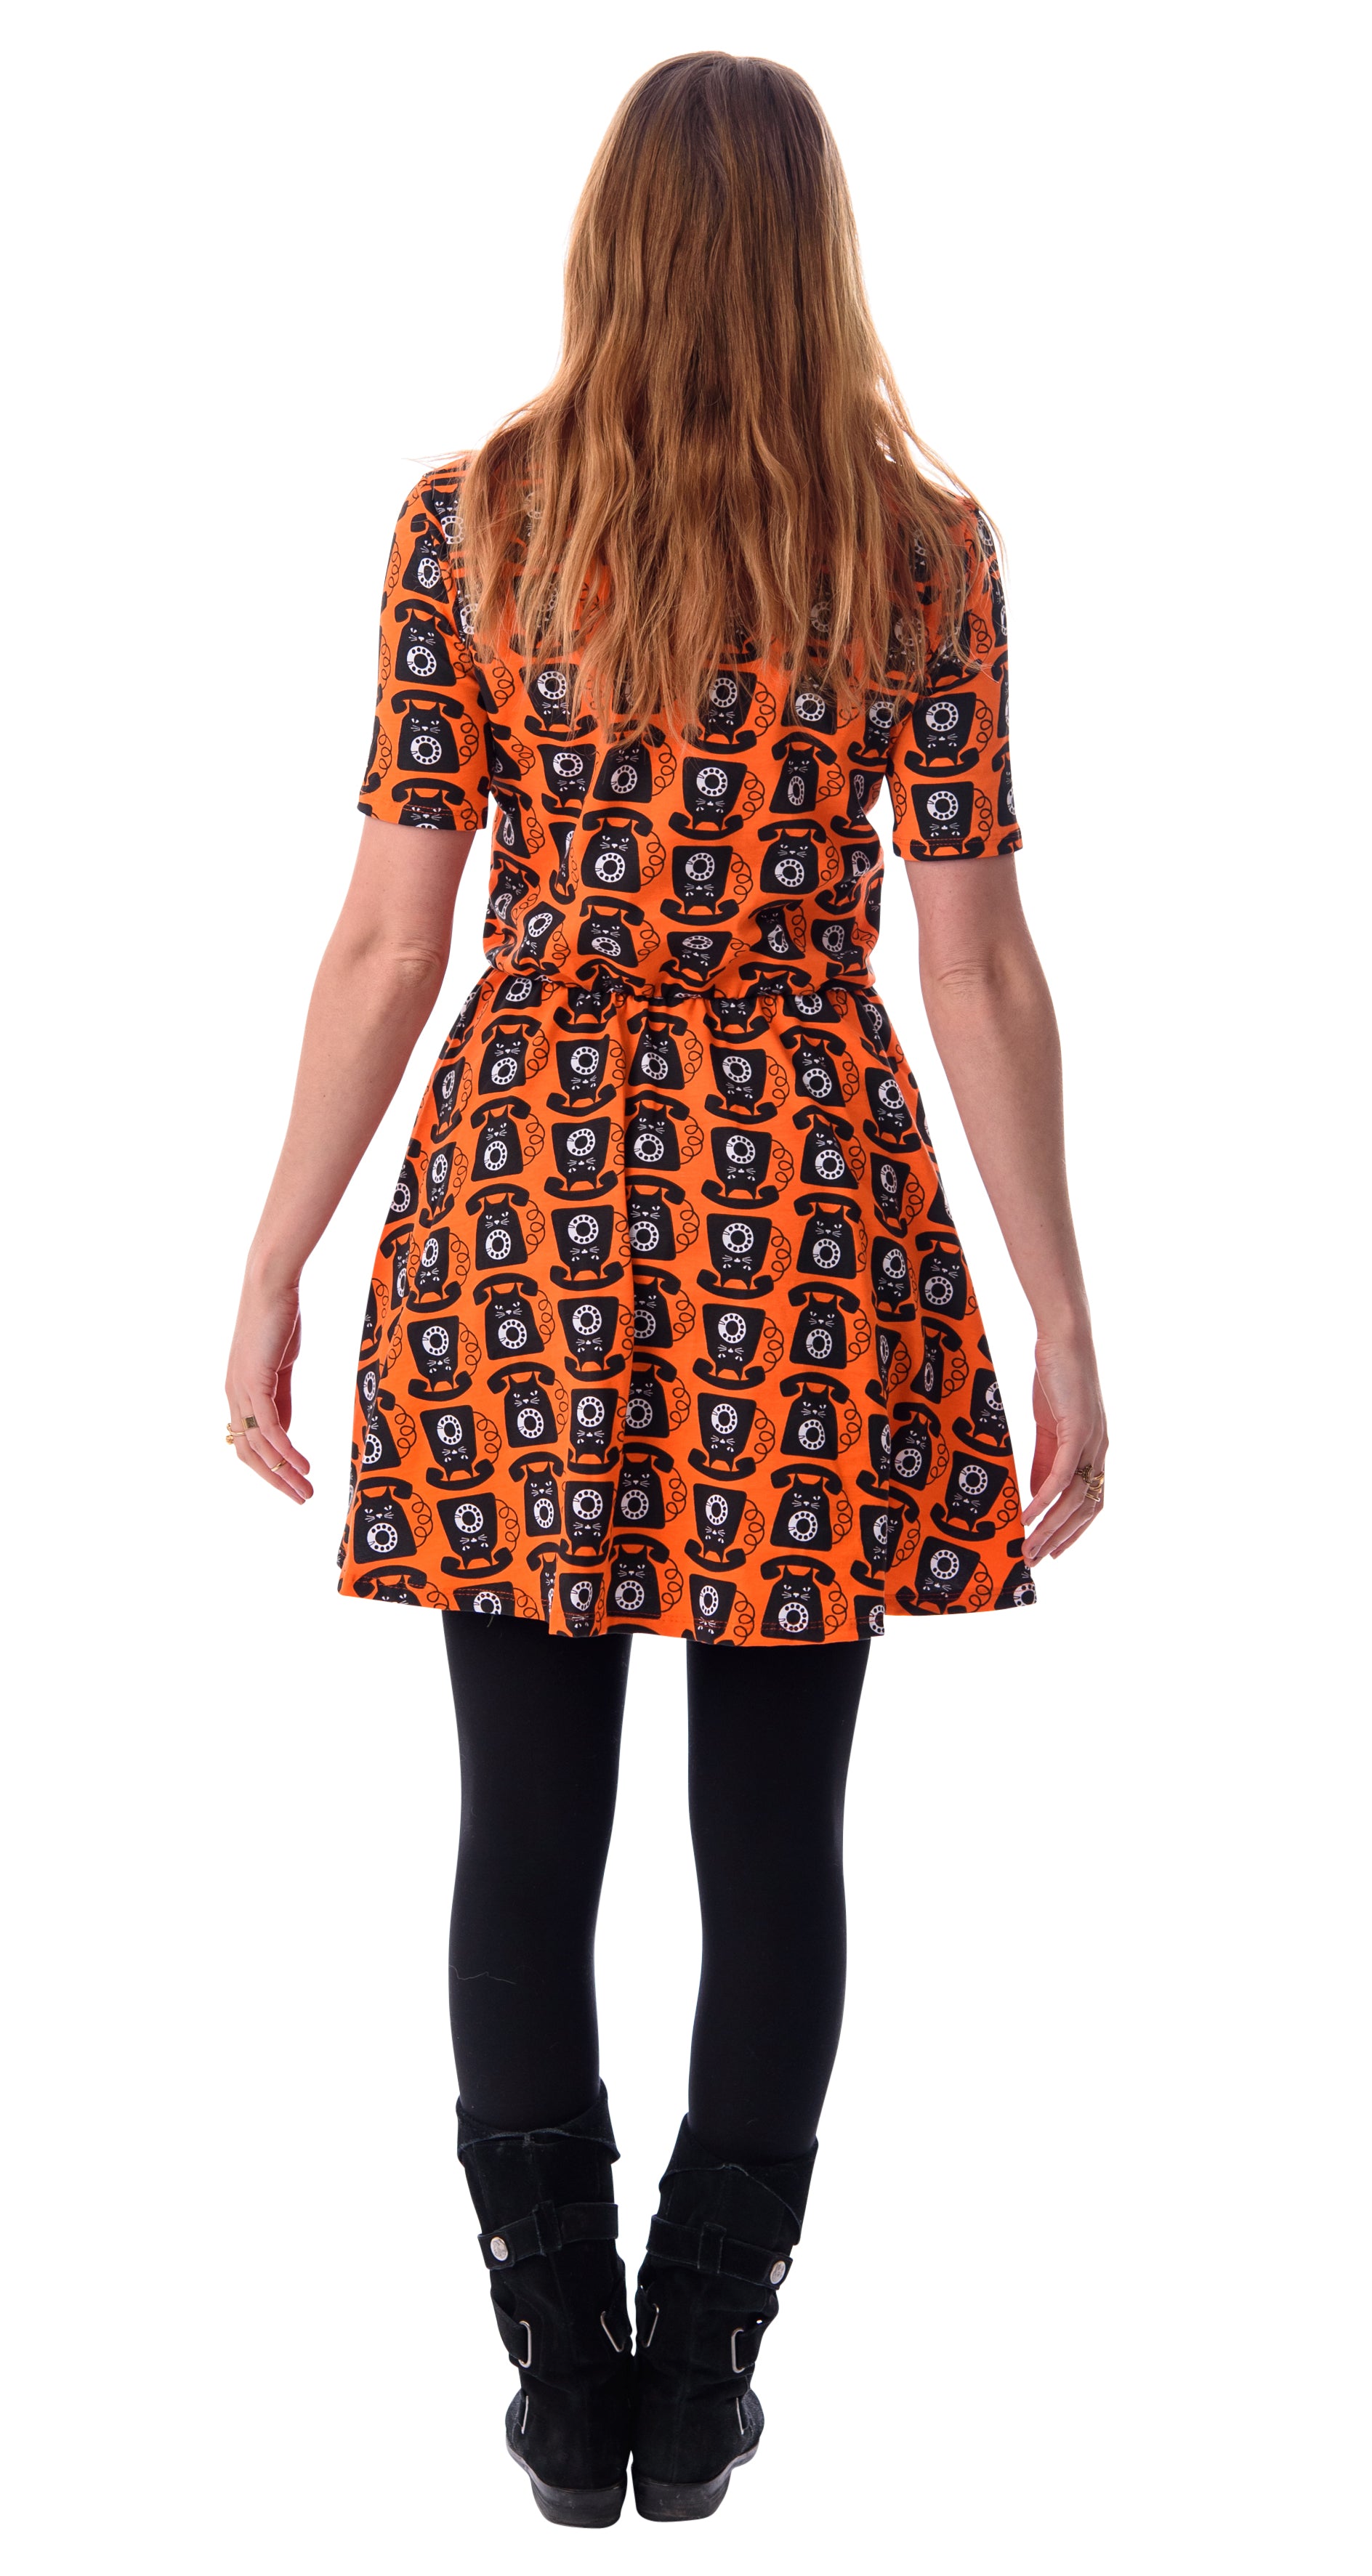 Back view of orange black and white cat phone print knit skater dress with elbow length sleeves, pockets and elastic waist